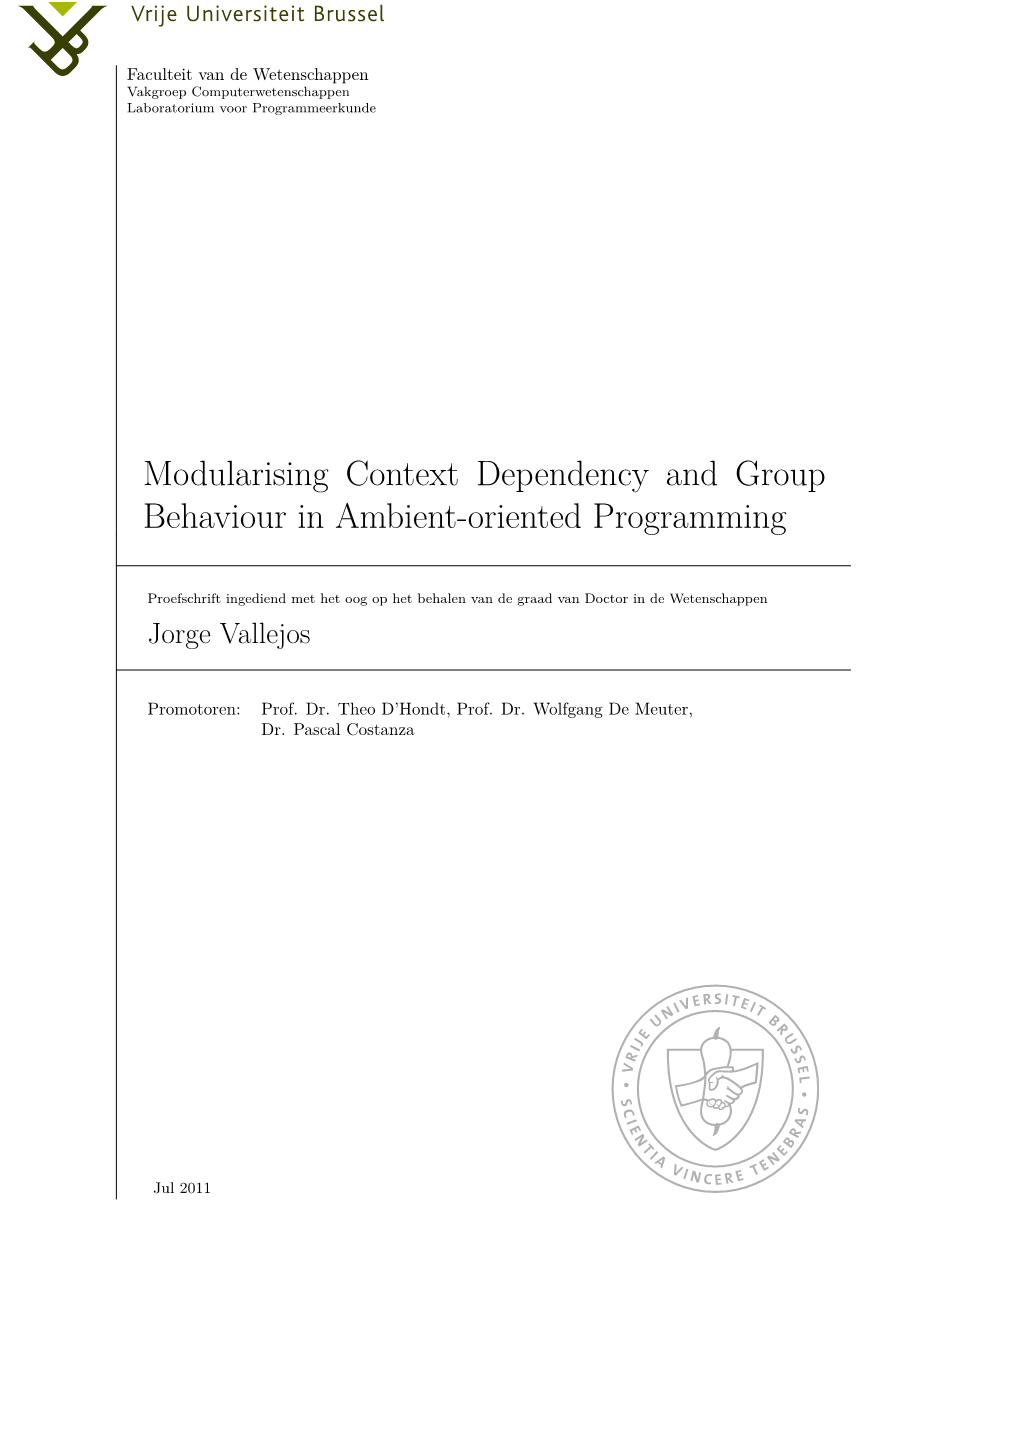 Modularising Context Dependency and Group Behaviour in Ambient-Oriented Programming